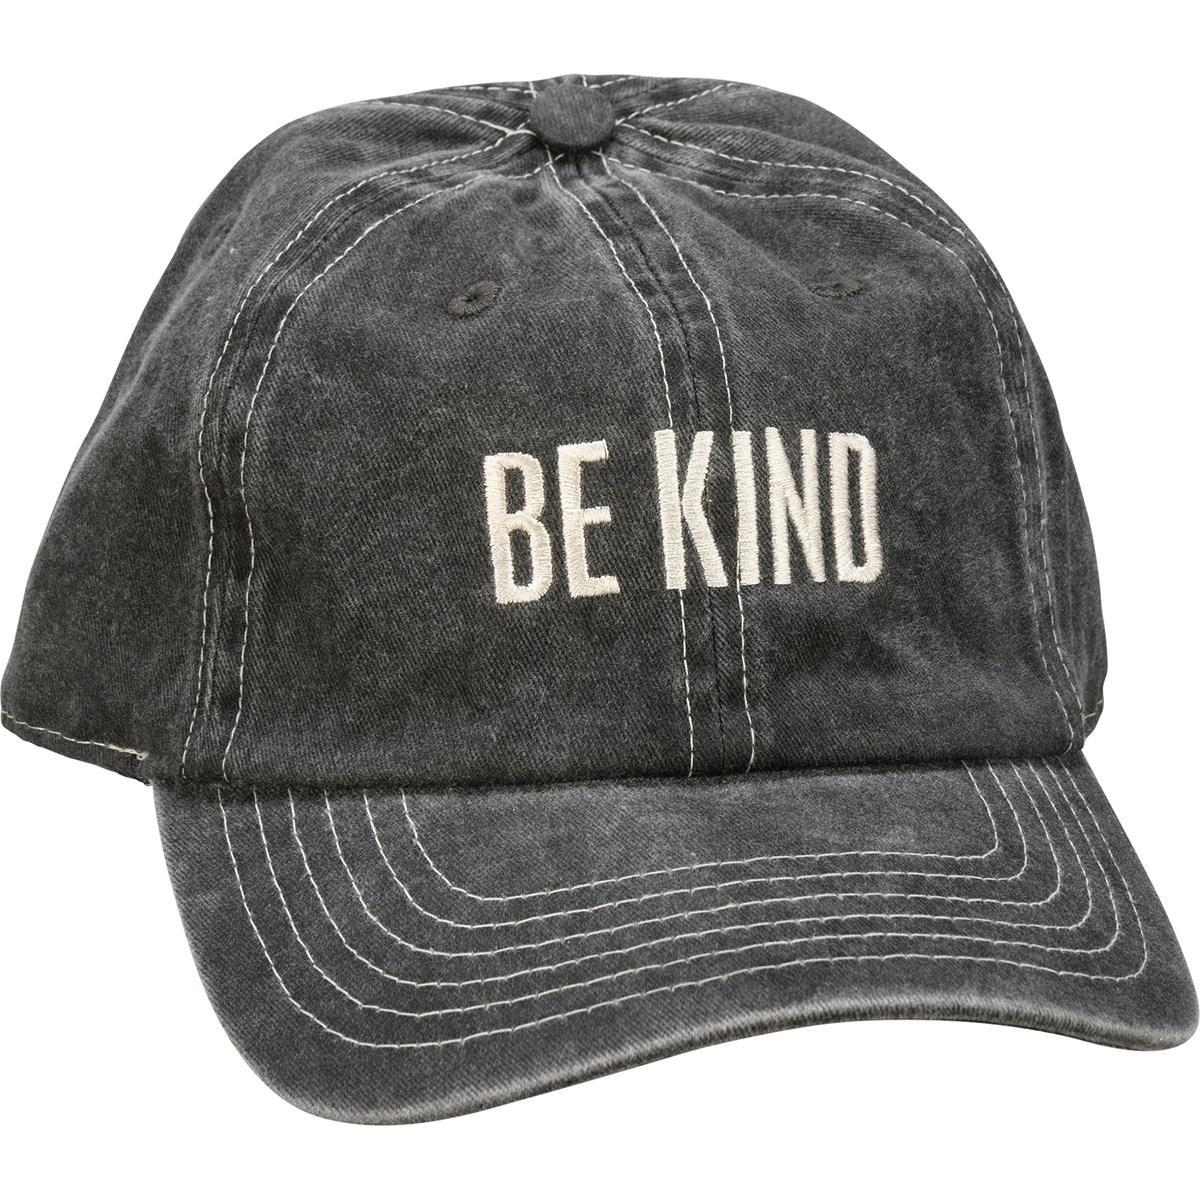 Be Kind Embroidered Hat